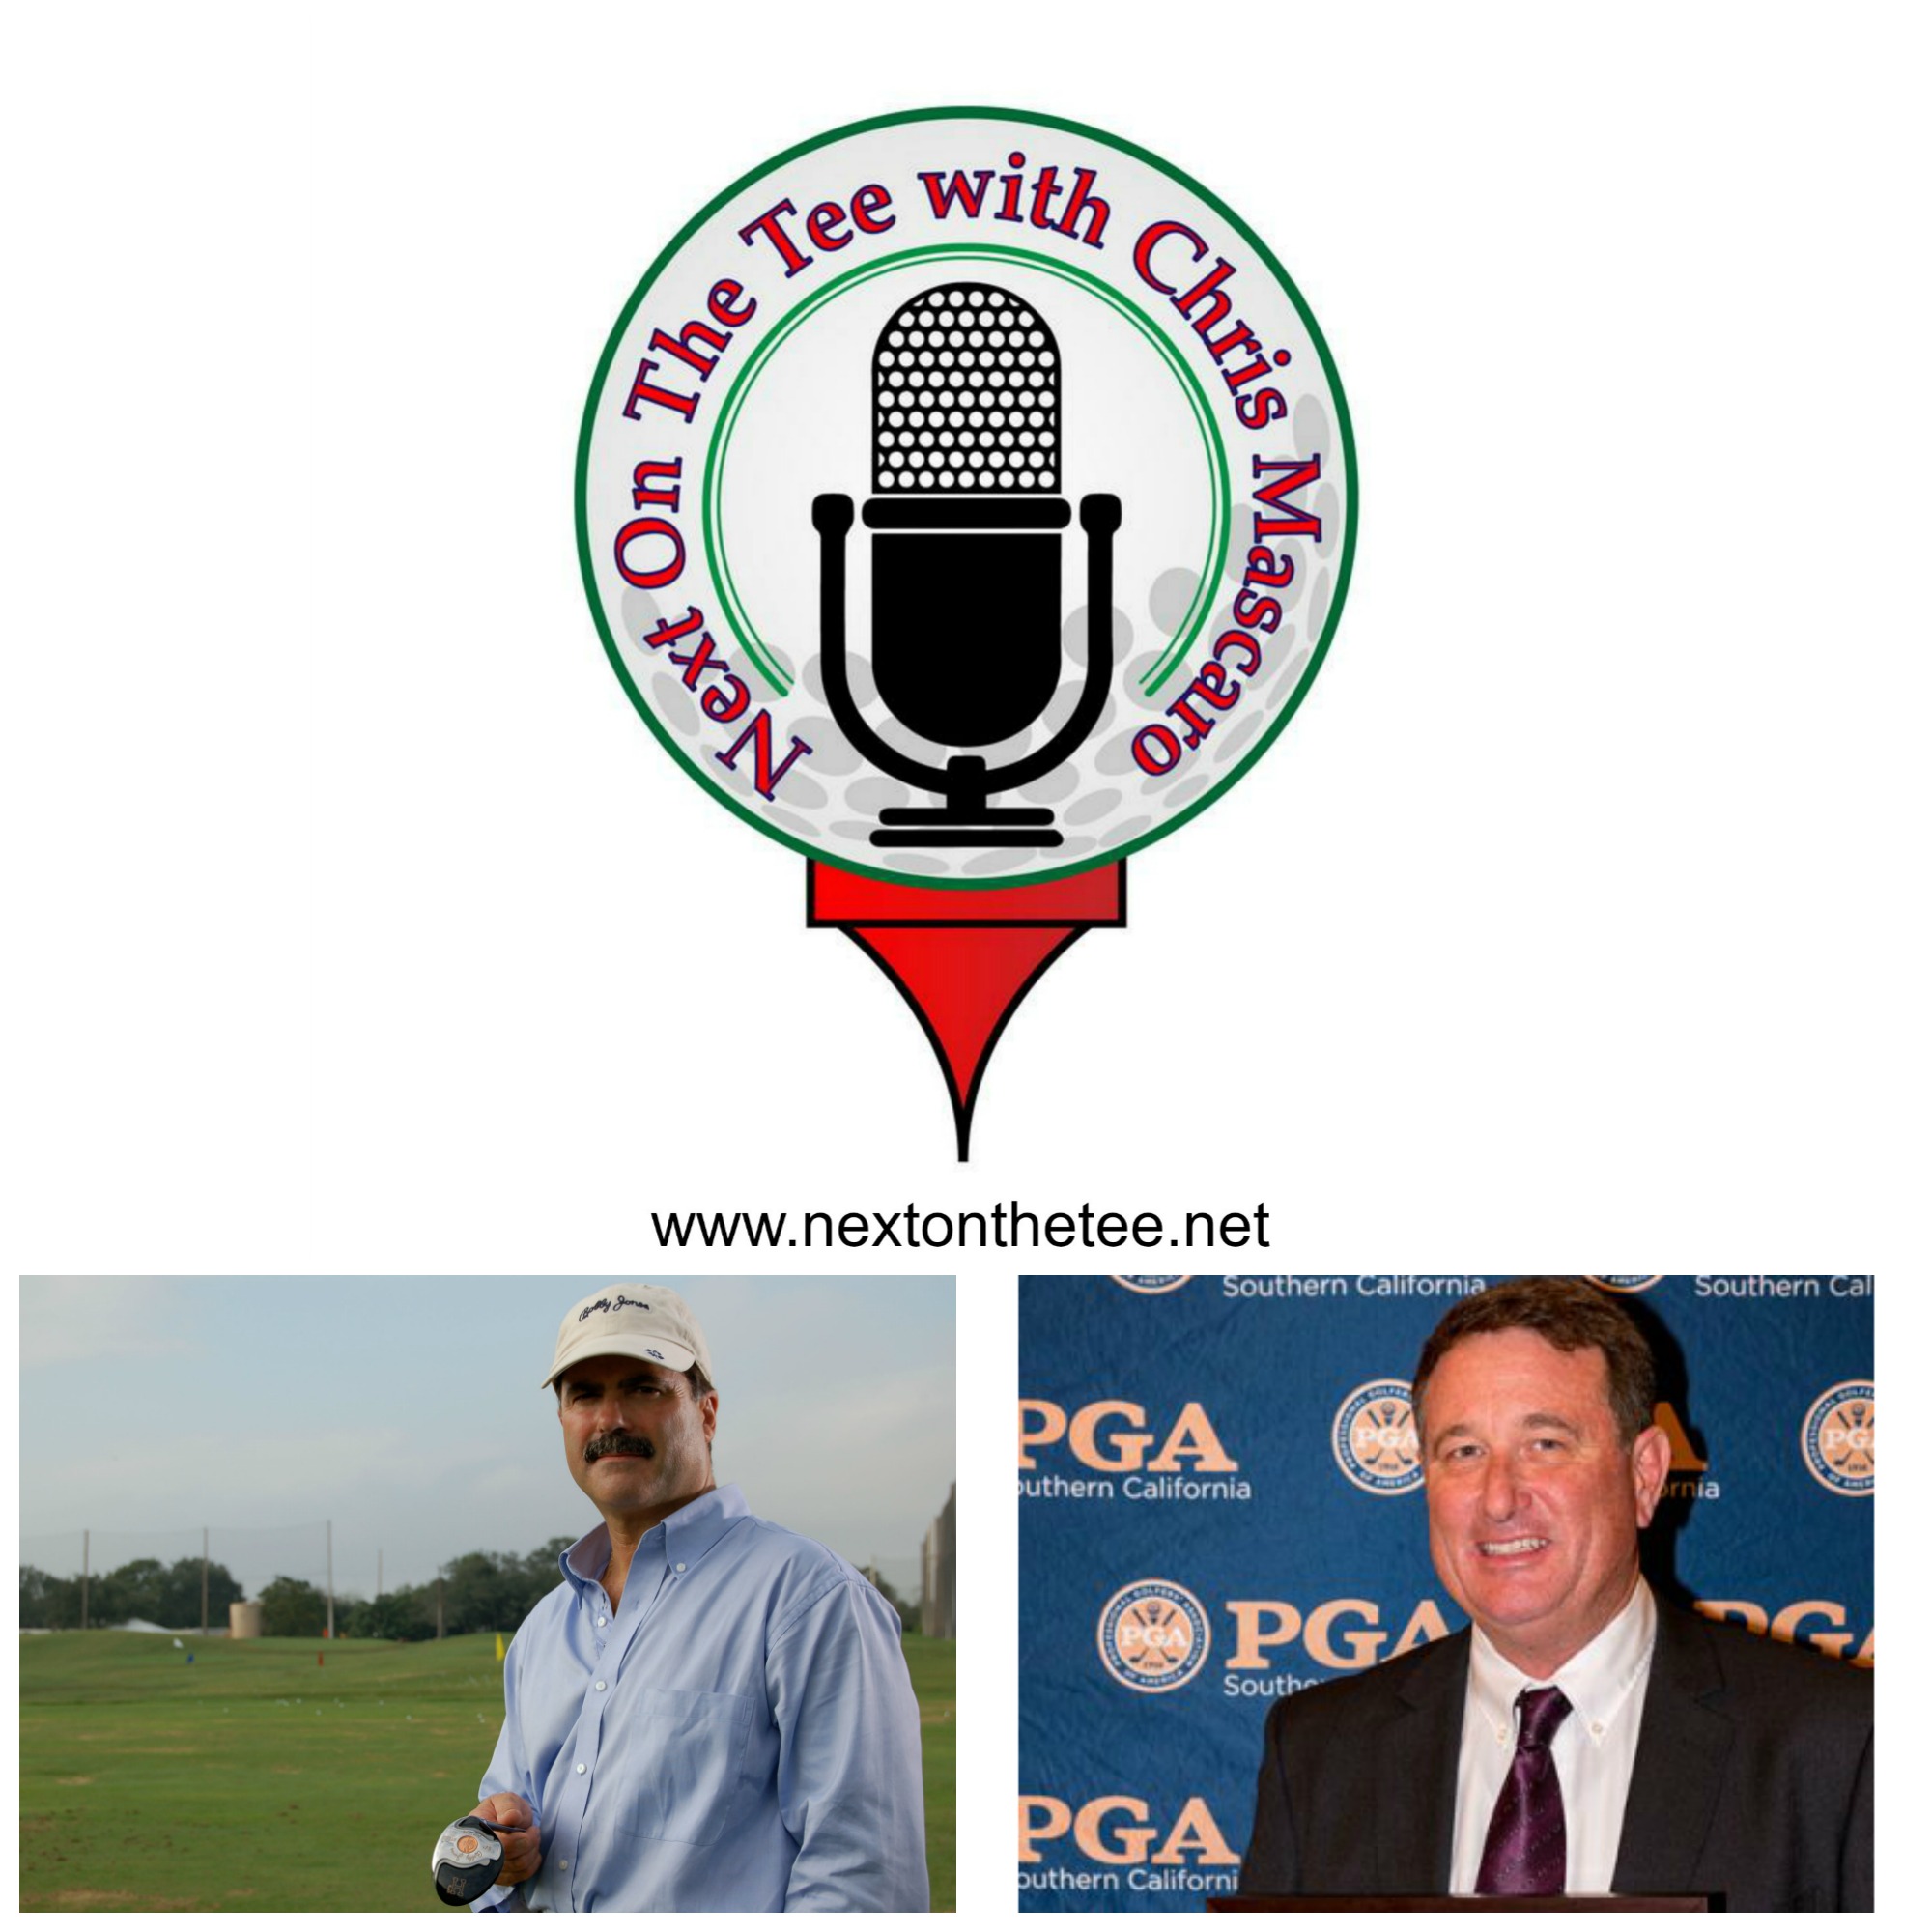 Golf Club Designer Jesse Ortiz talks about his great hybrids for Bobby Jones Golf & PGA Pro Joe Grohman talks about the racism he saw a young Tiger Woods face at the Navy Golf Club on Next on the Tee